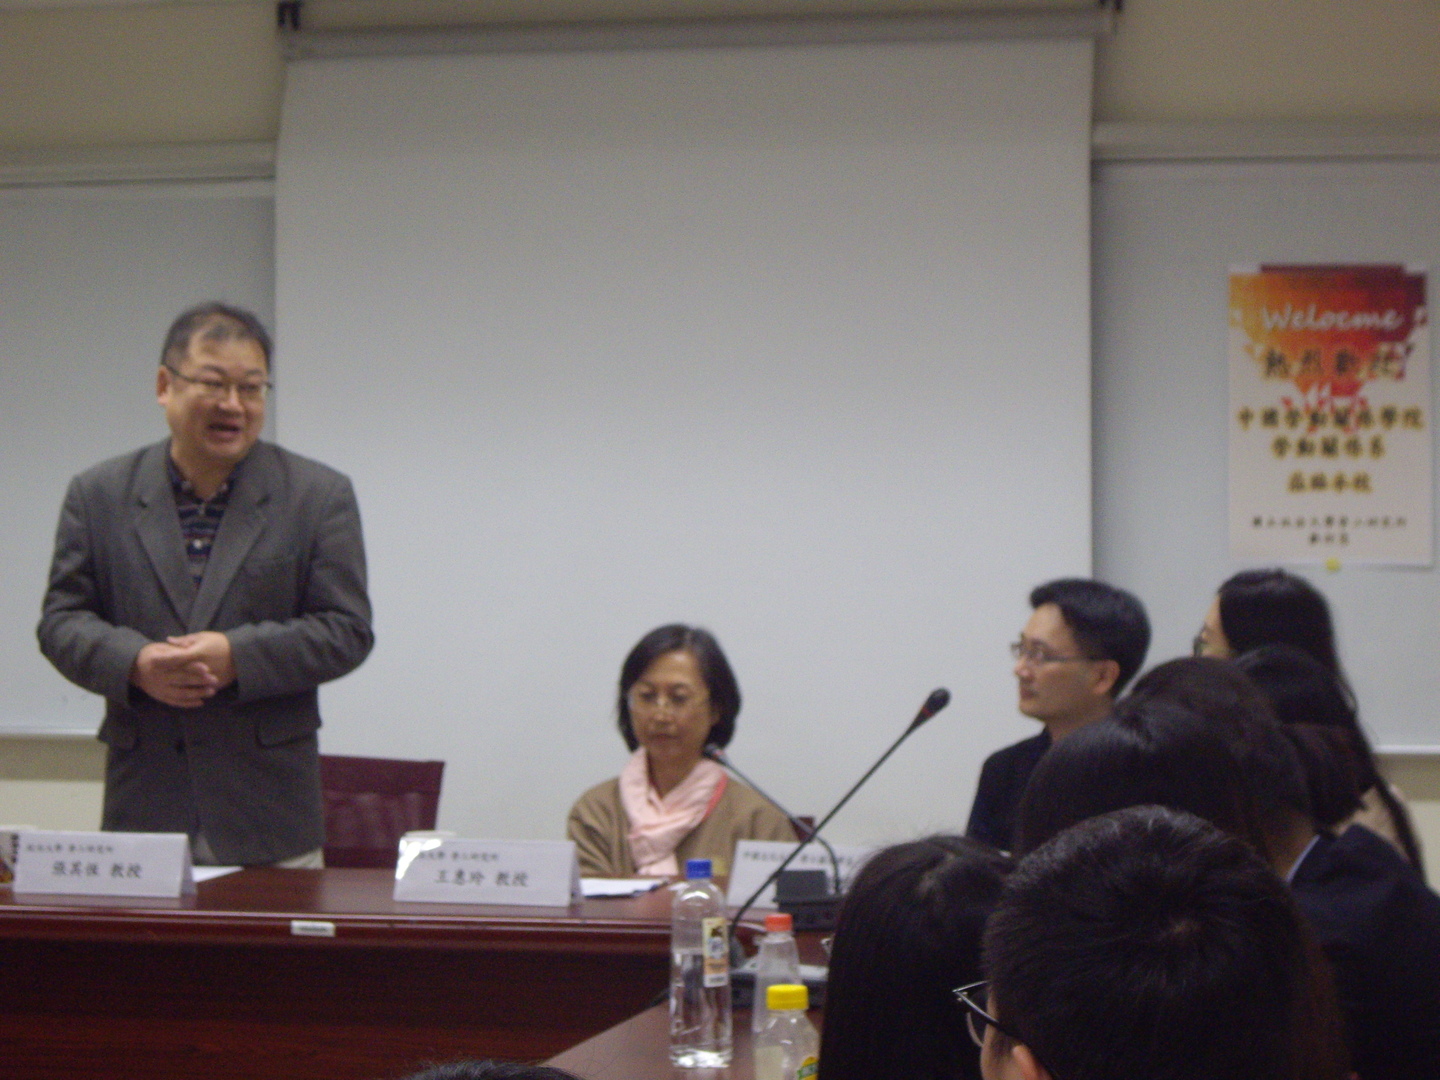 The visiting of China University of Labor Relations (2016.12.06)